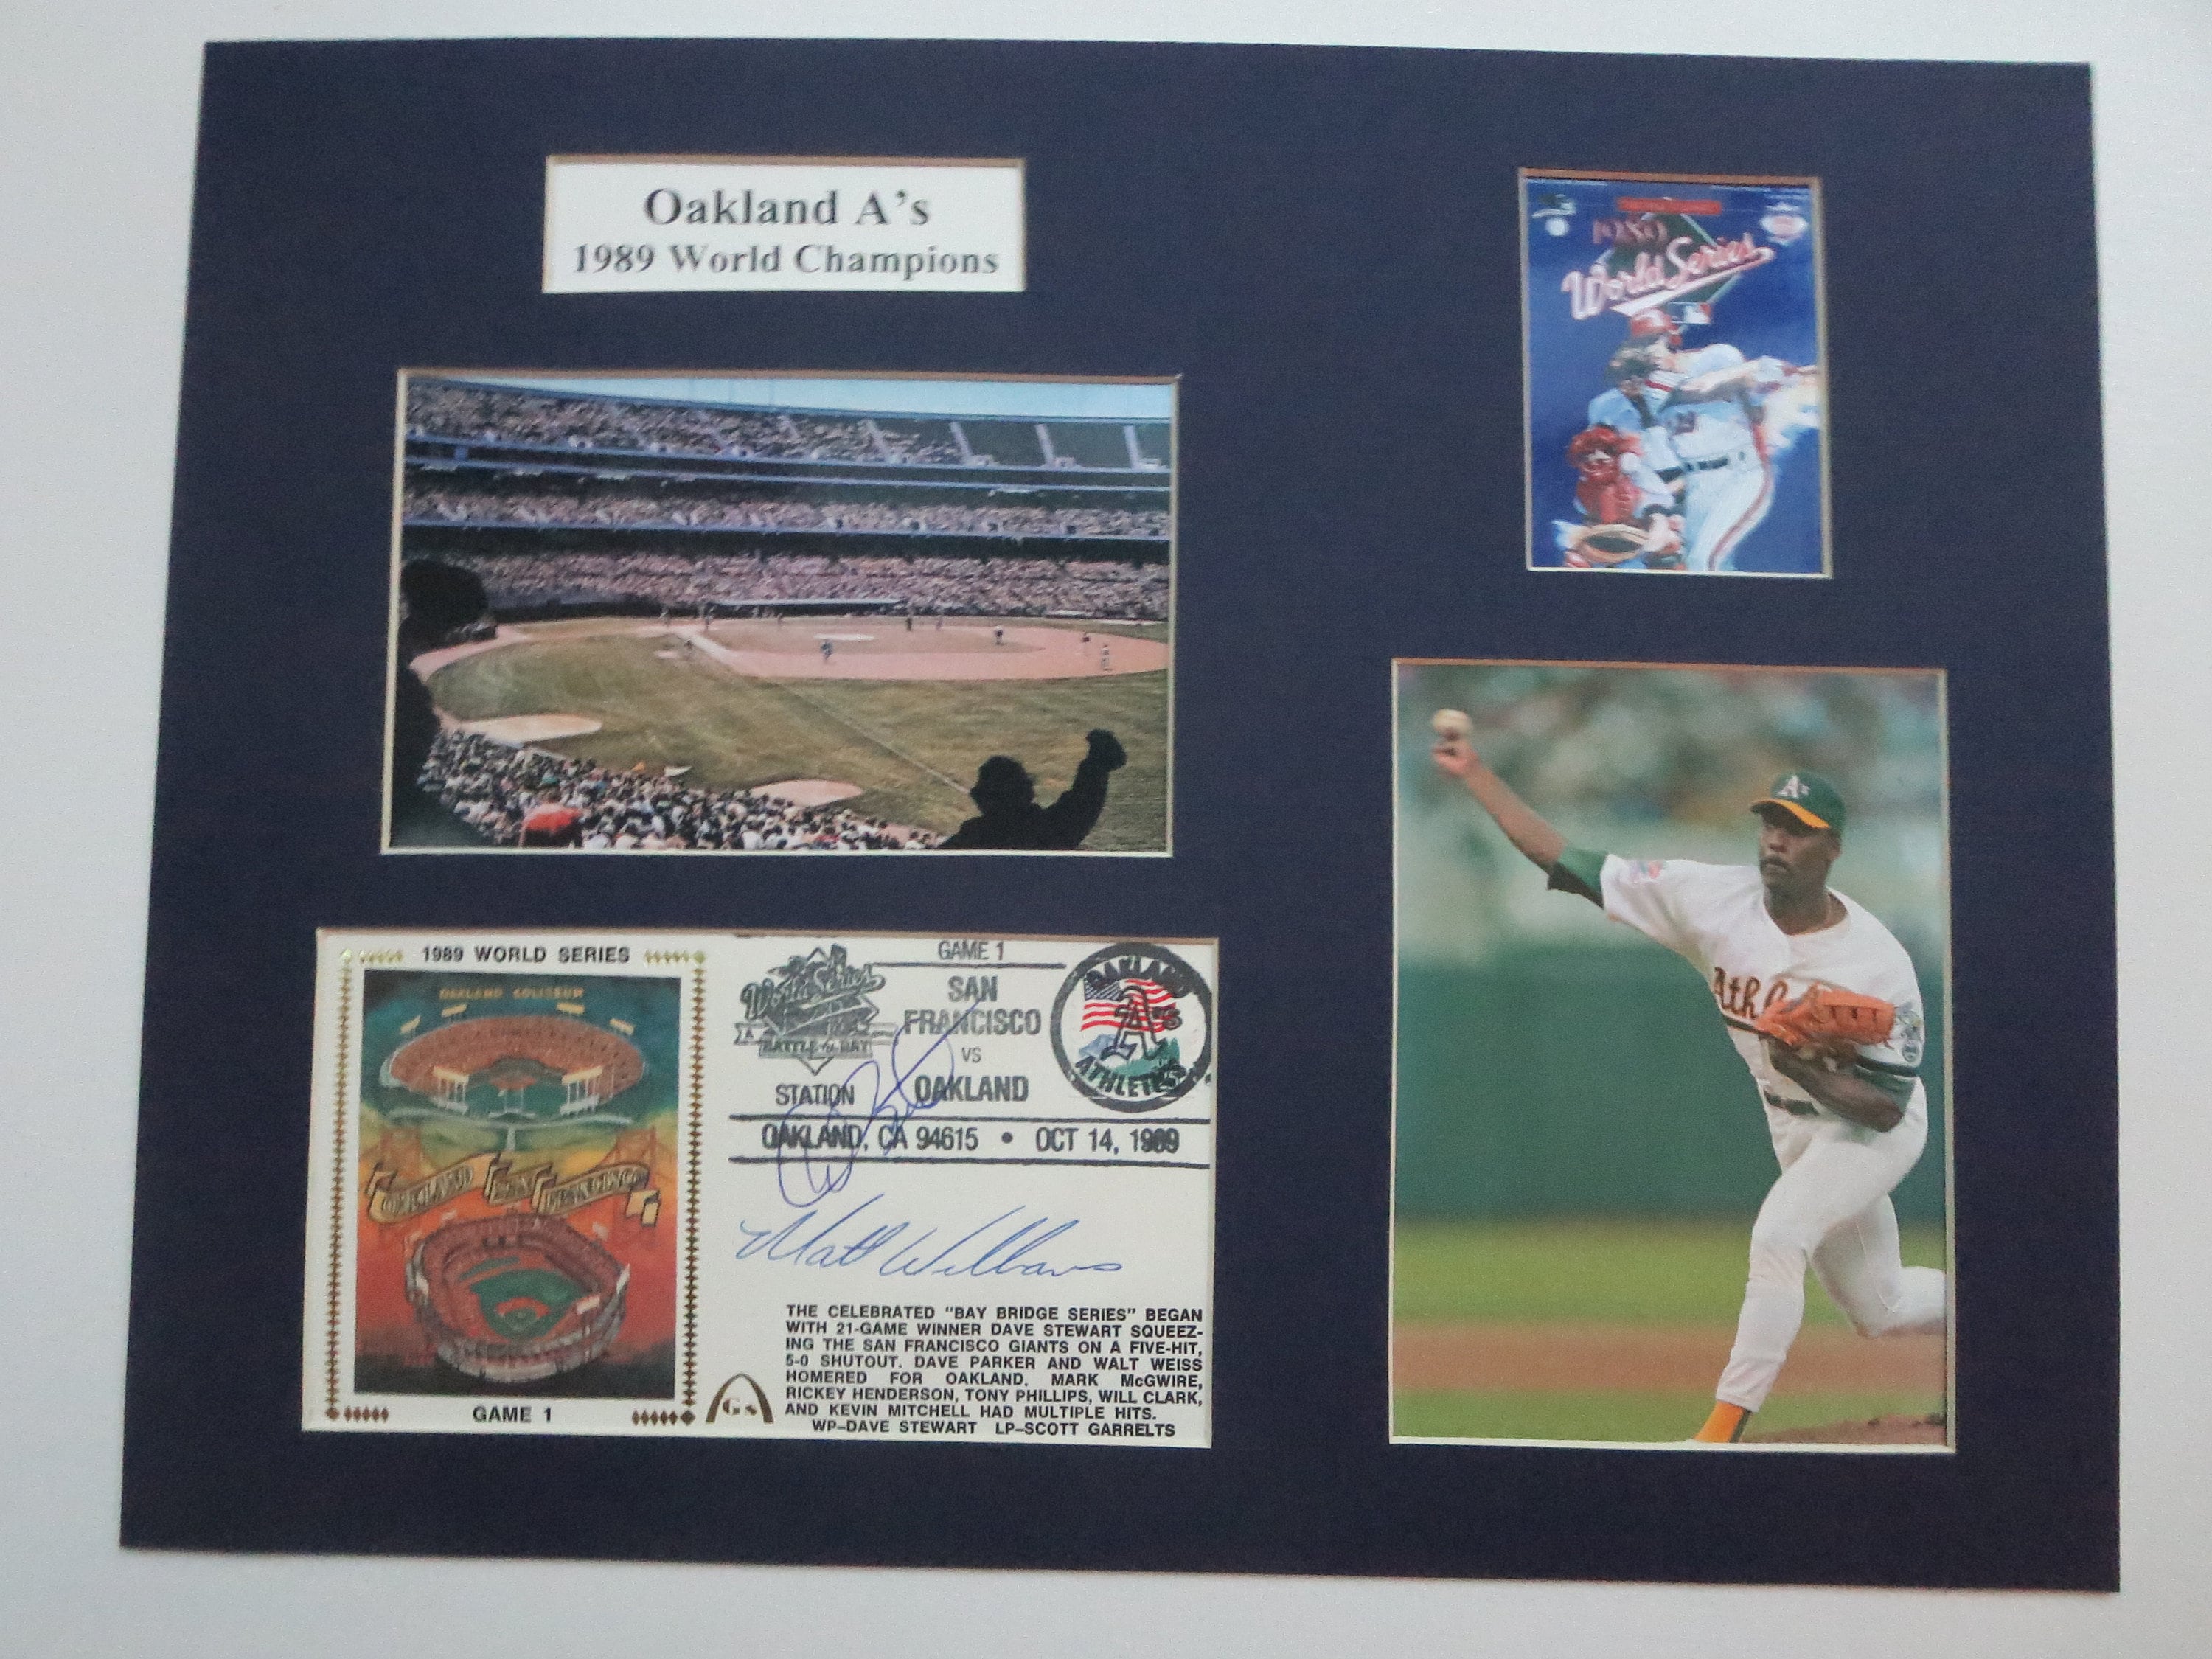 Oakland A's 1989 World Series Champs and a Commemorative 